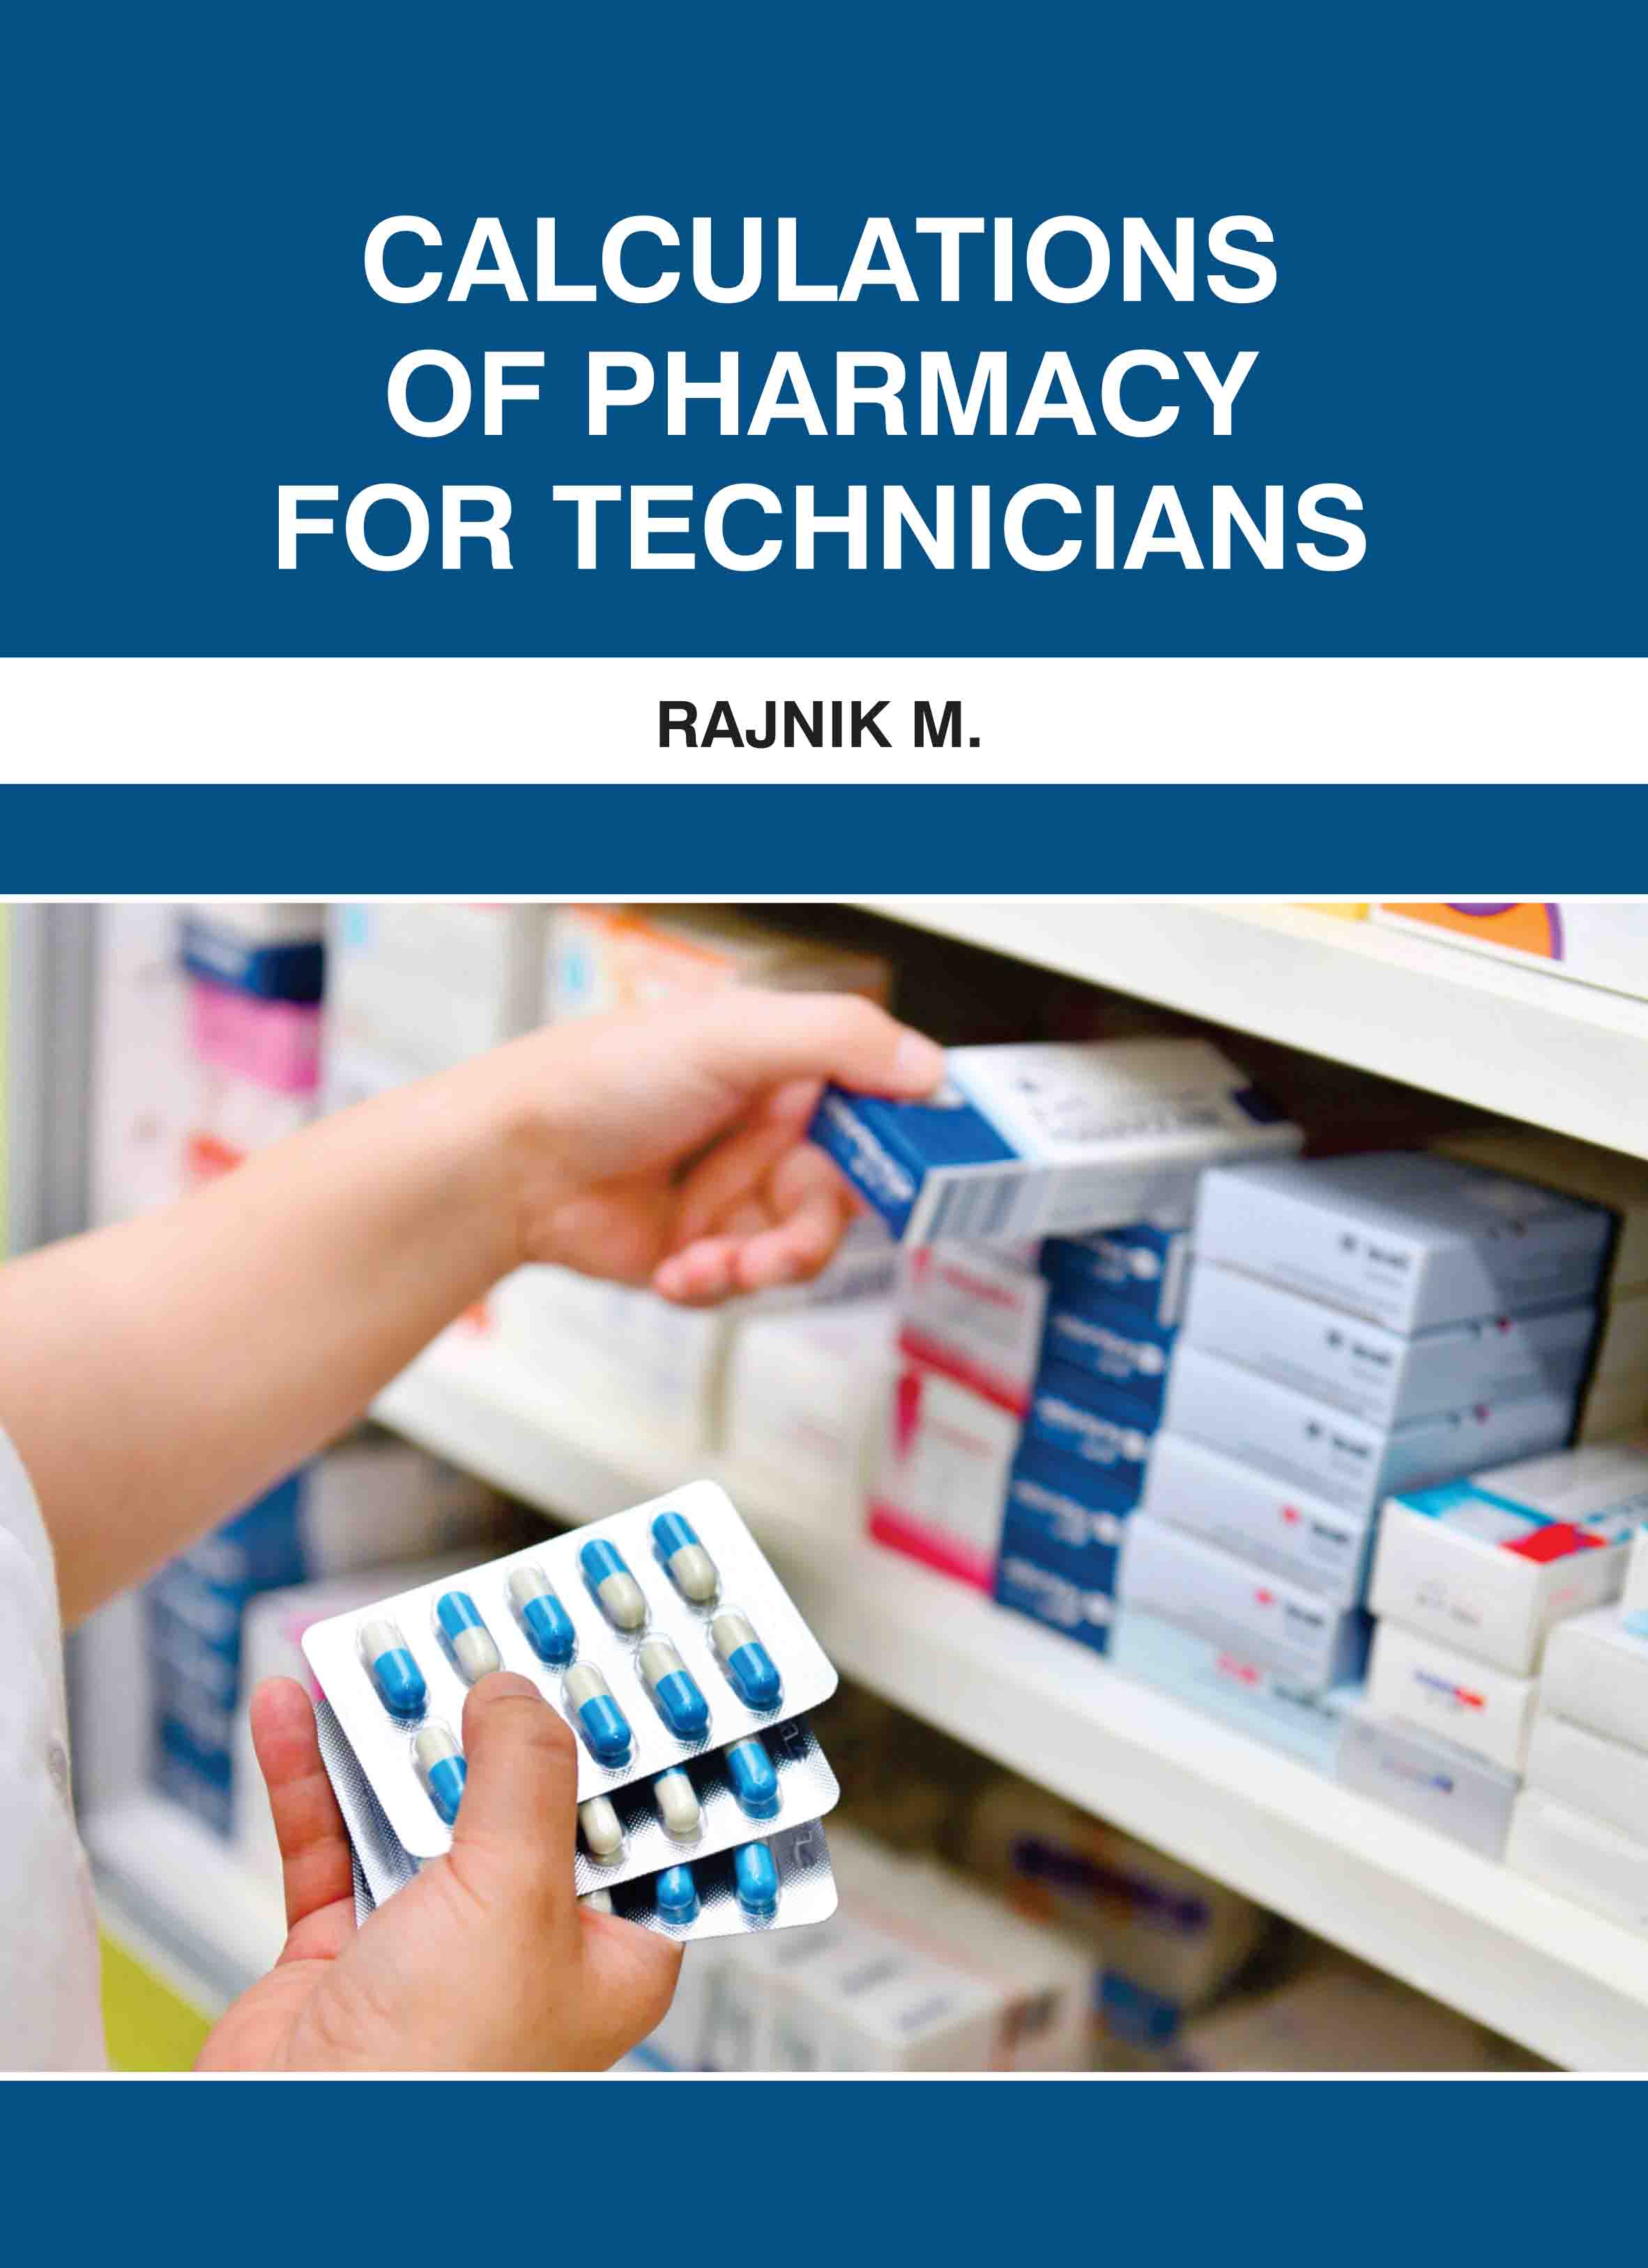 Calculations of Pharmacy for Technicians